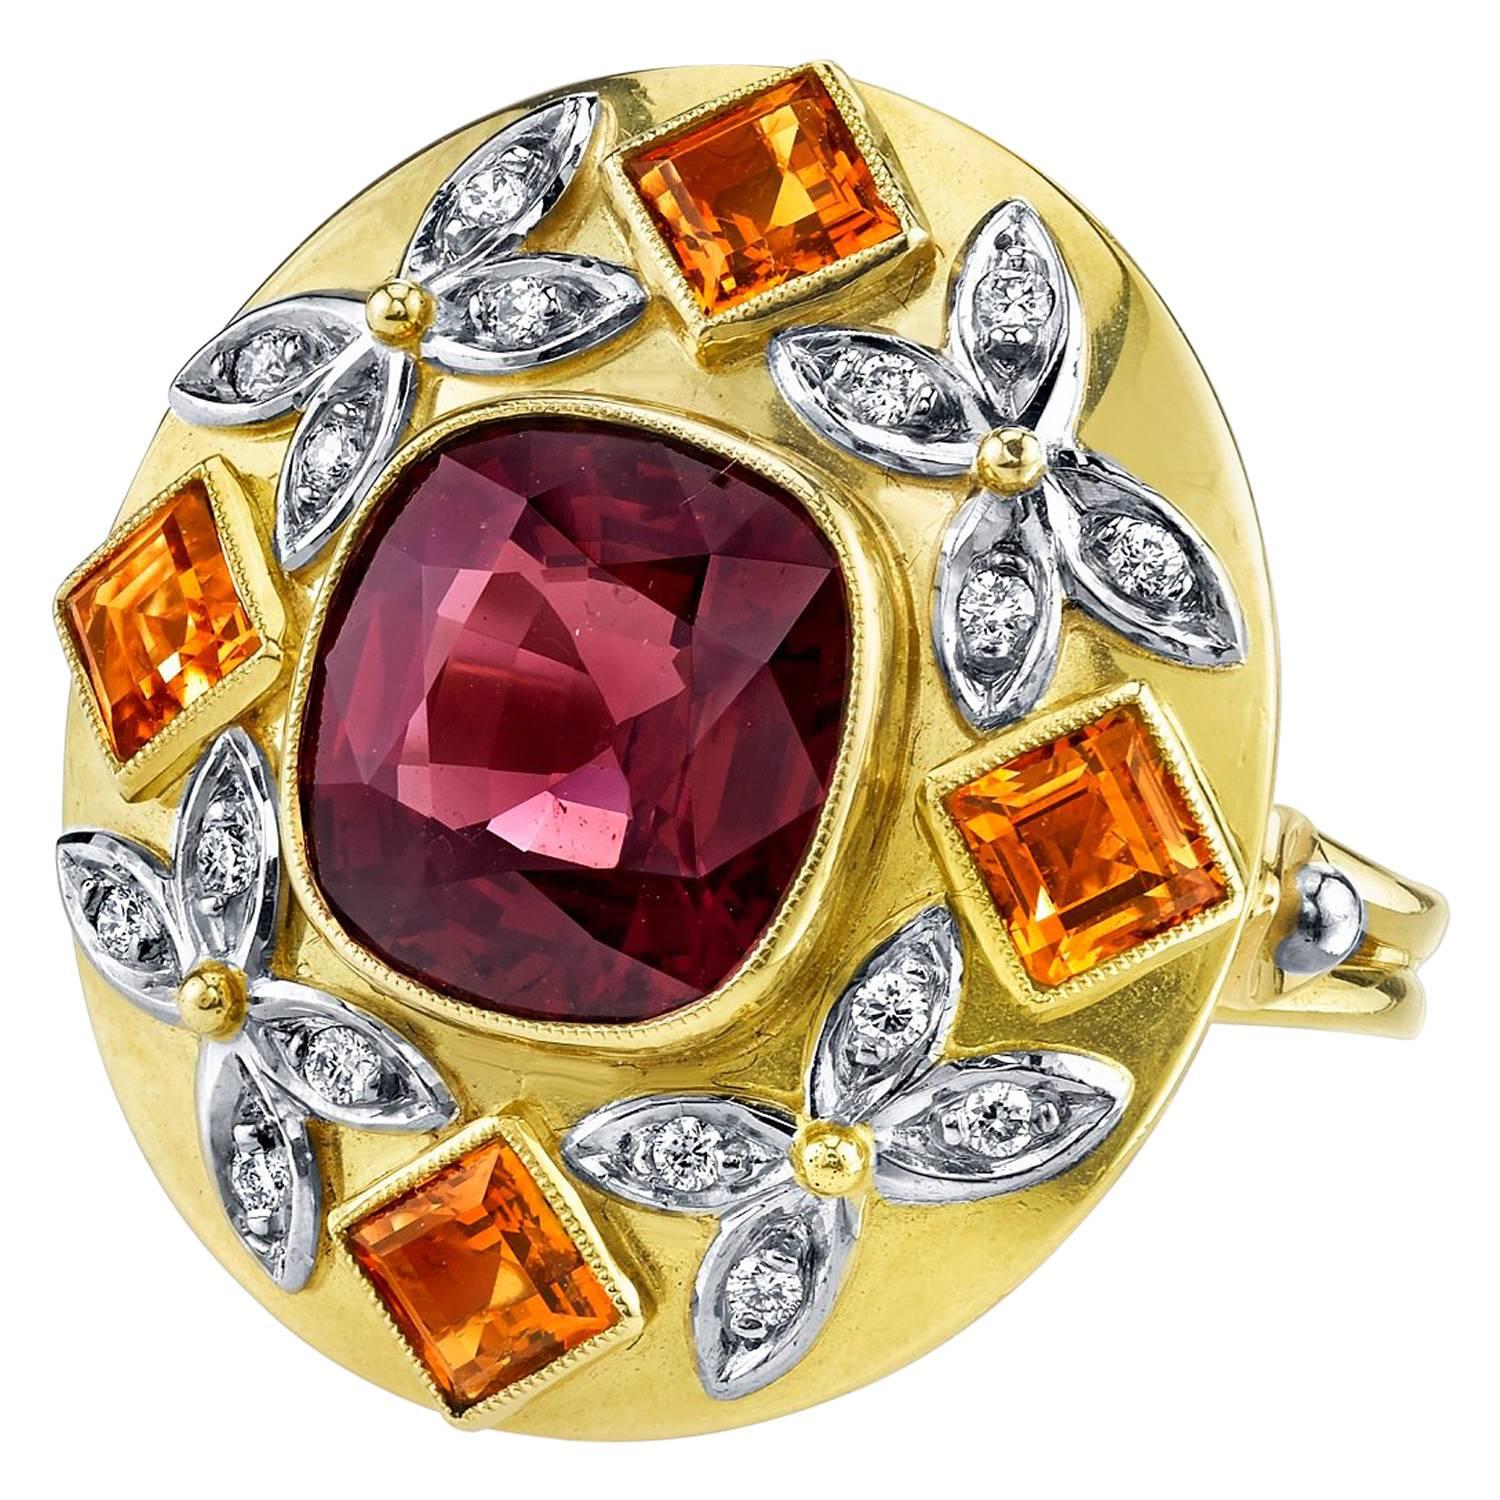 5.23 Carat Red Spinel, Citrine and Diamond Cocktail Ring in Tri-colored Gold